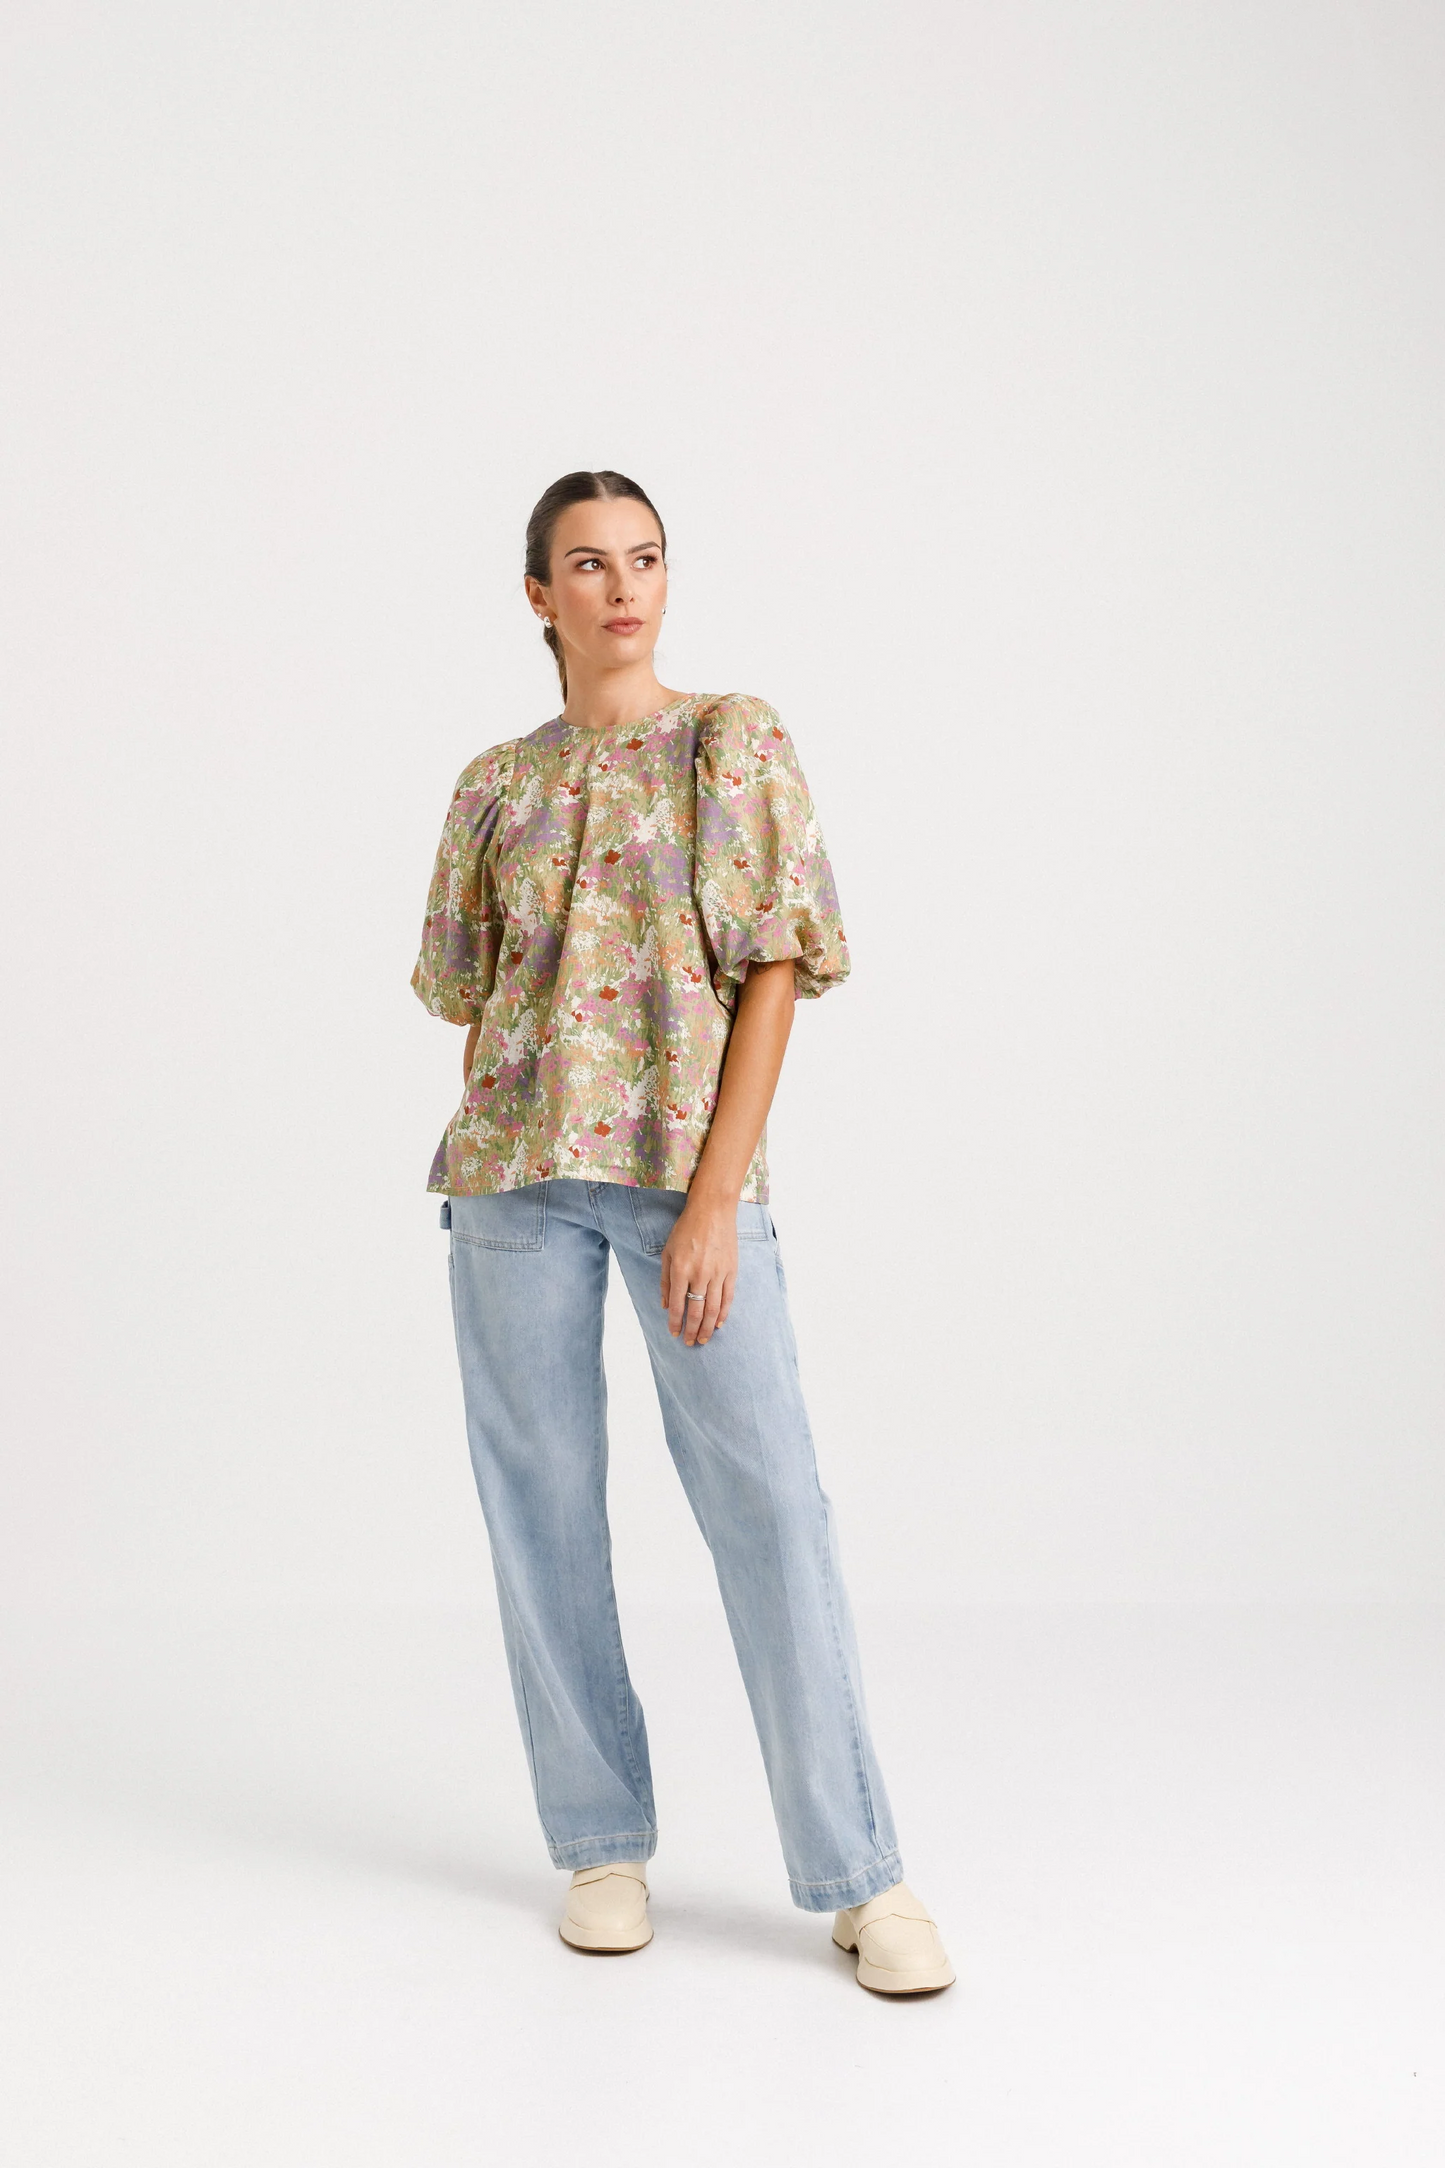 THING THING LUCIE TOP - DREAMSCAPE - THE VOGUE STORE